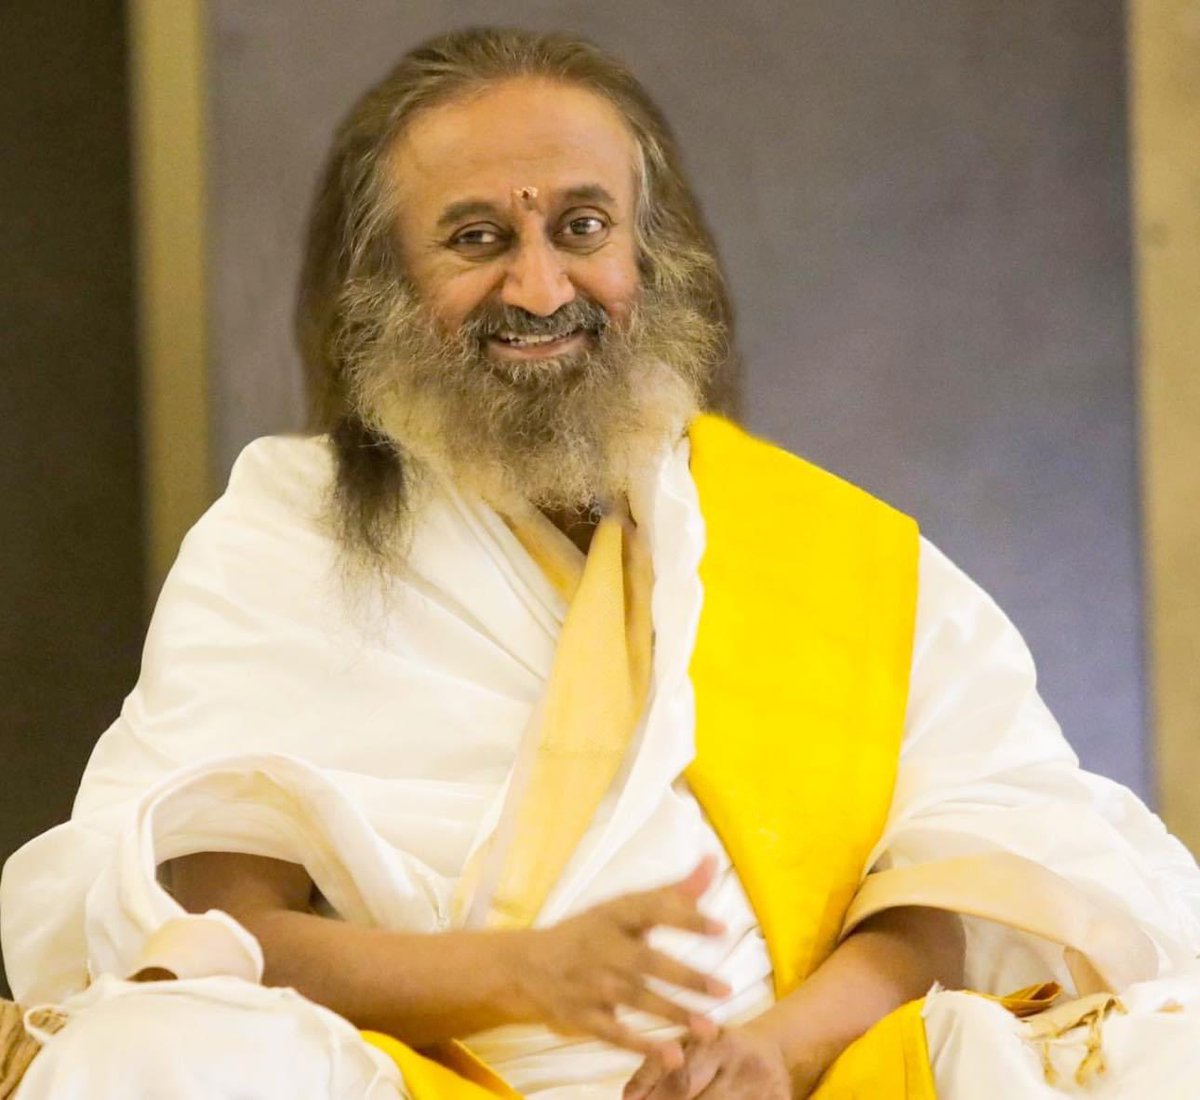 Worrying doesn't make any difference, but working does; and spiriţuality gives one the strength to work. #Gurudev @SriSri #RaviShankar ji🍀🌿